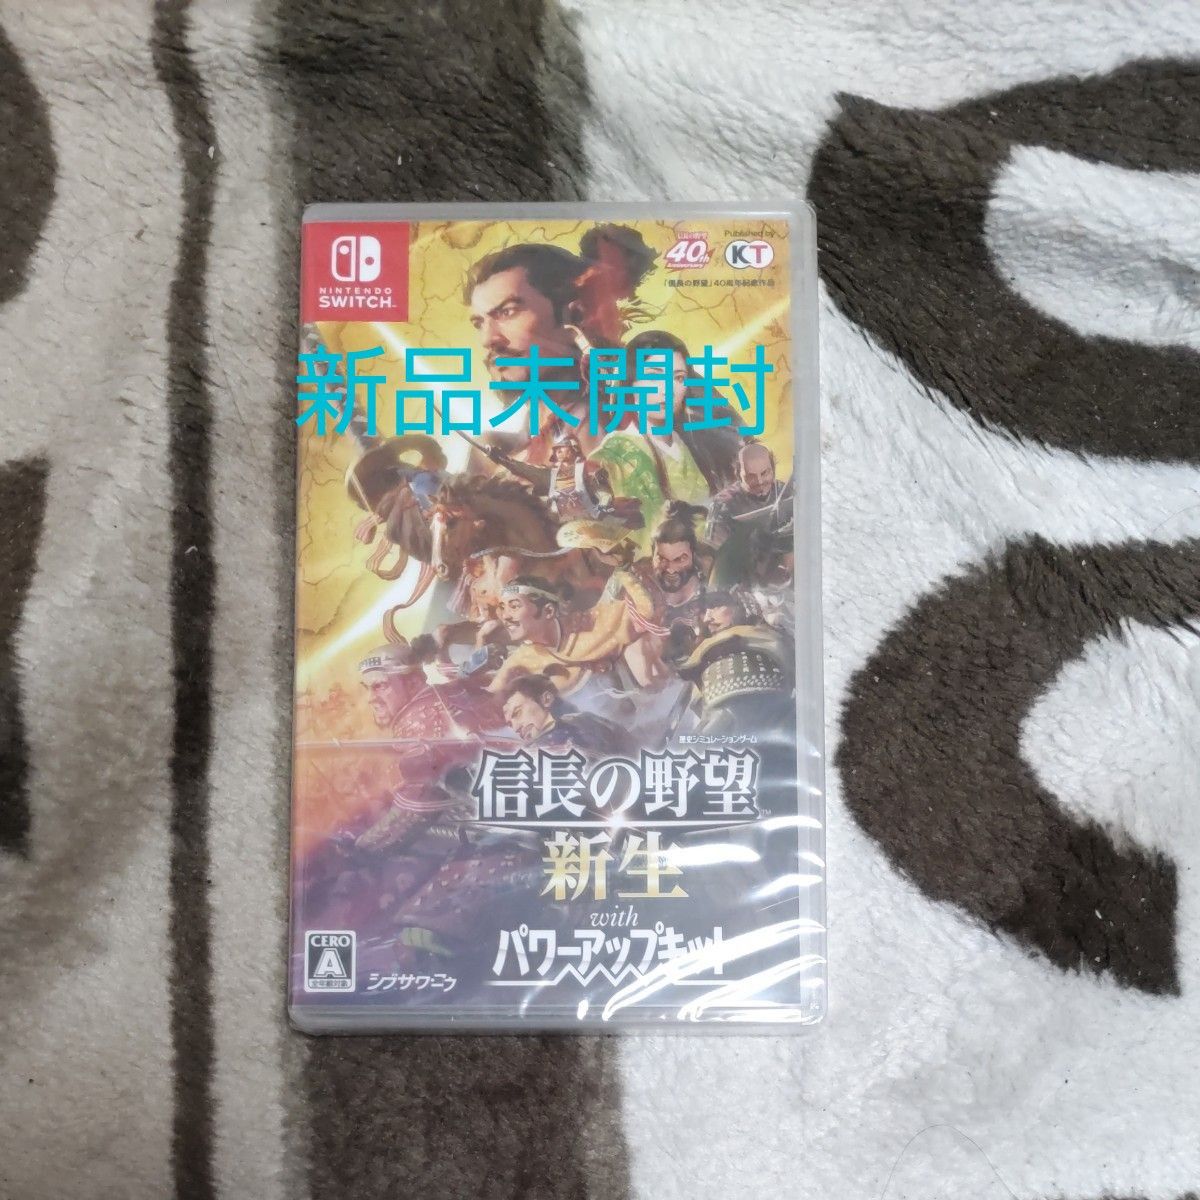 Switch】 信長の野望・新生 withパワーアップキット [通常版] 新品未